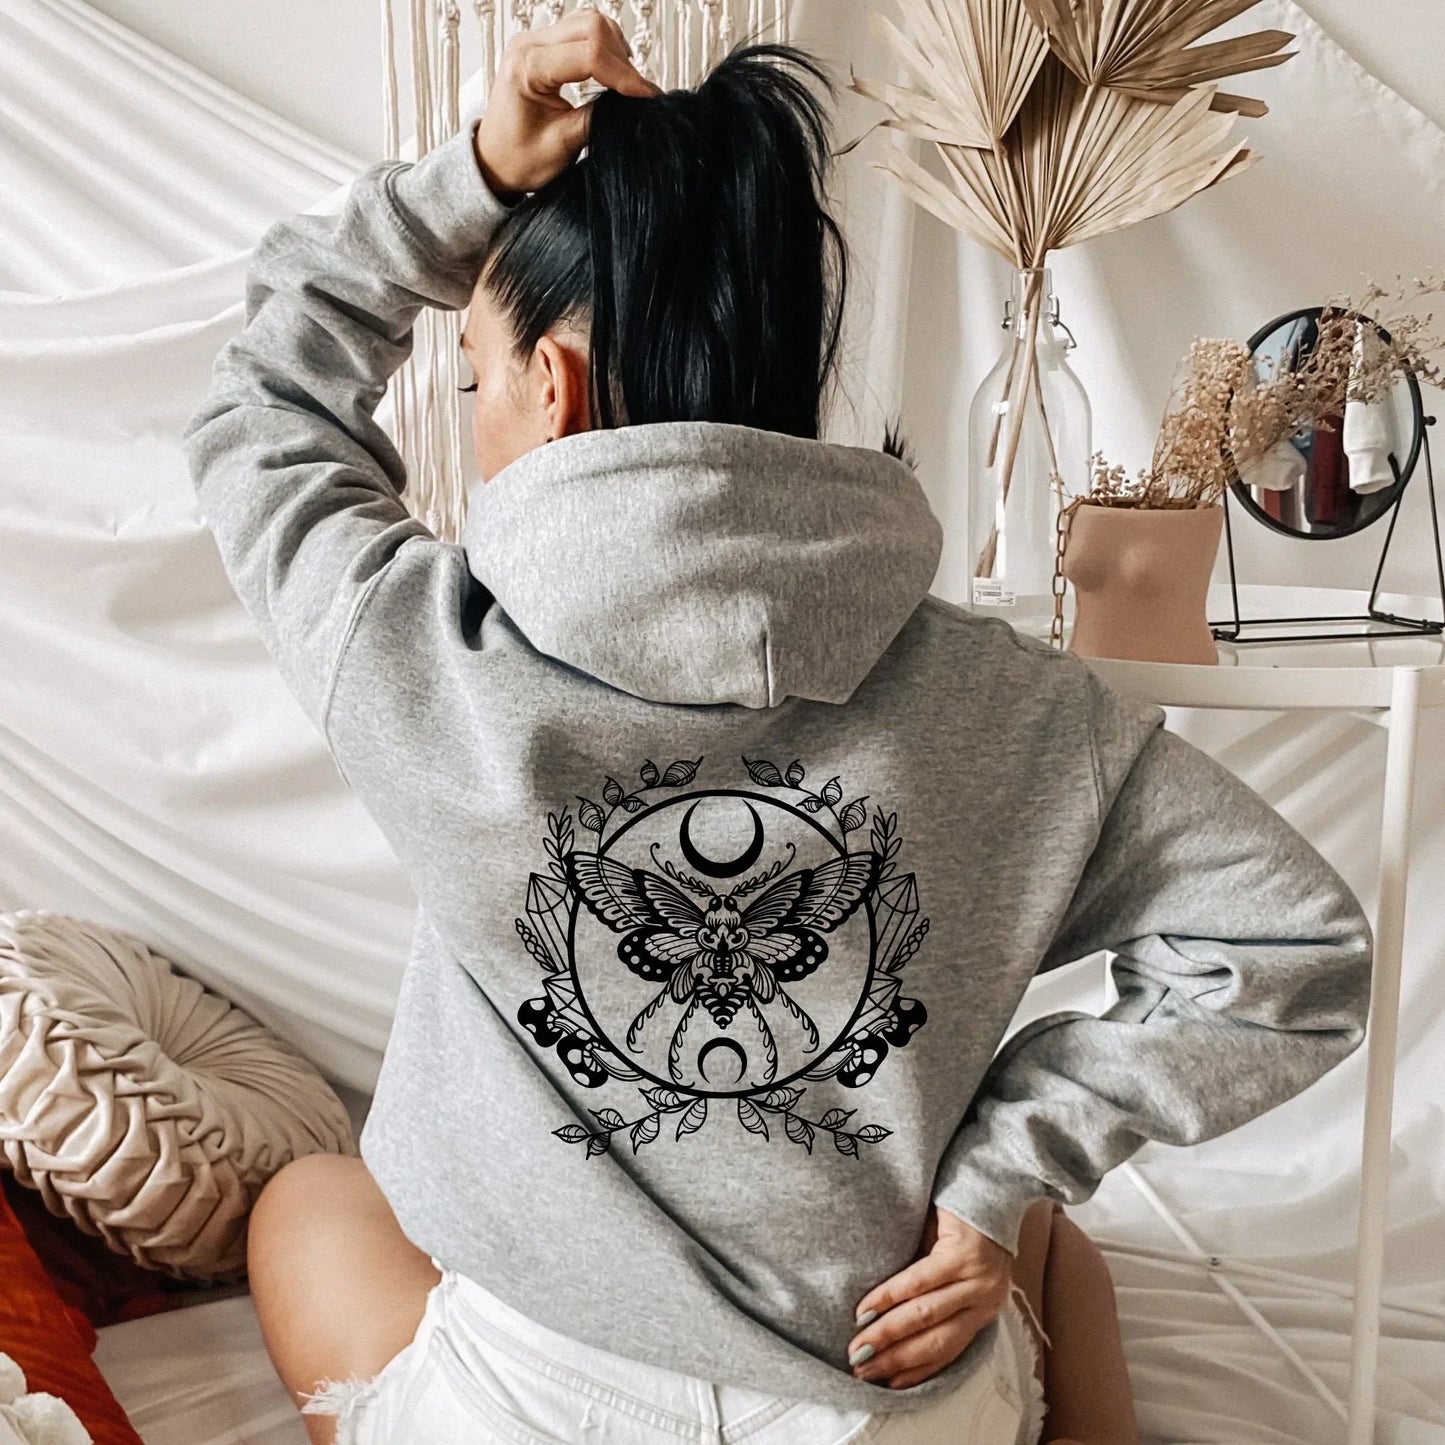 Luna Moth Zip Up Hoodie, Moon Phases Mystical Full Zip Hoodie, Witchy Aesthetic, Boho Gifts for Her, Hippie Apparel w/ Mushrooms & Crystals HMDesignStudioUS